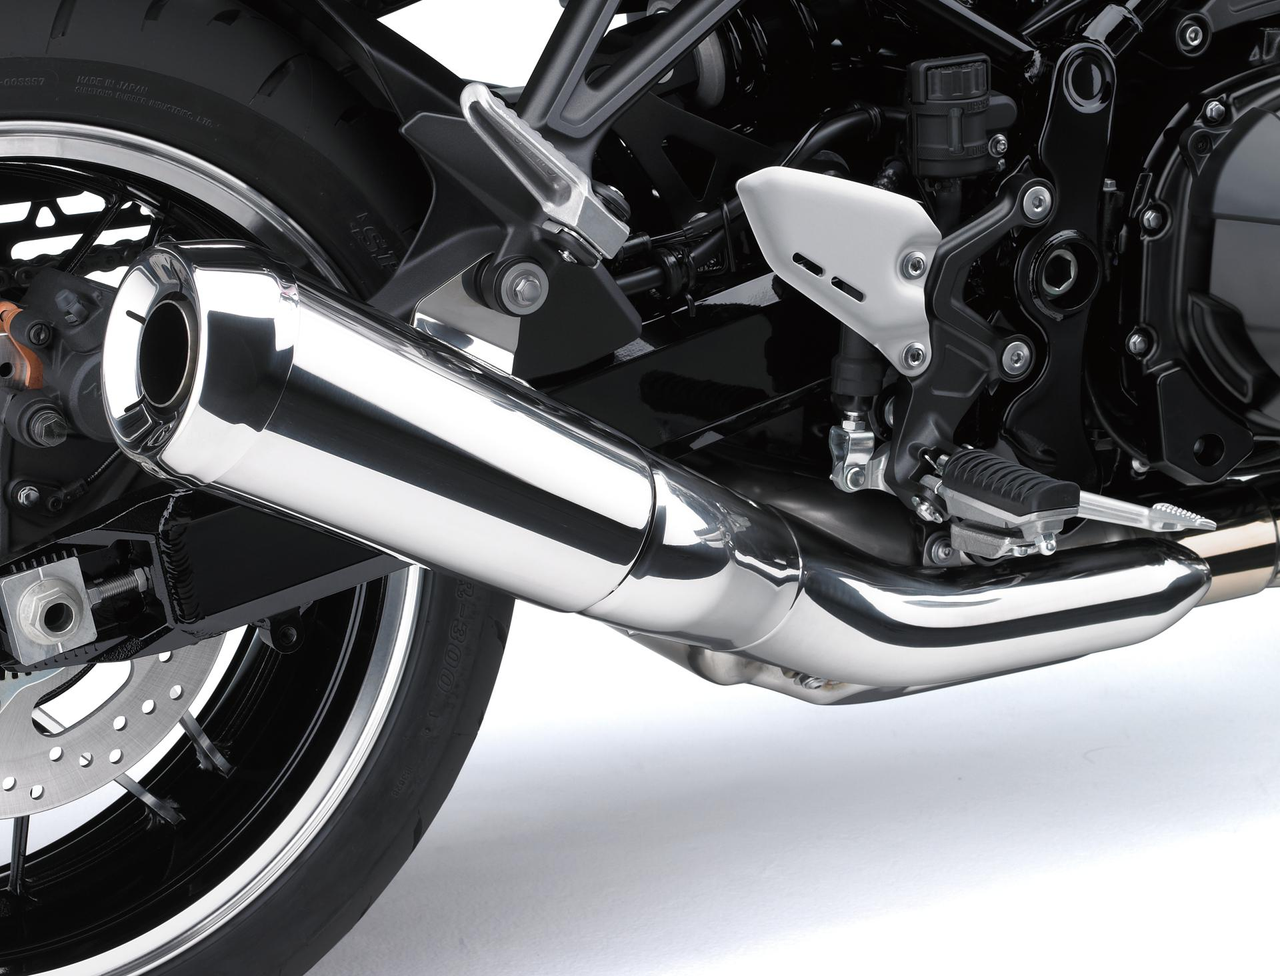 Kawasaki’s First Tuned Exhaust Note